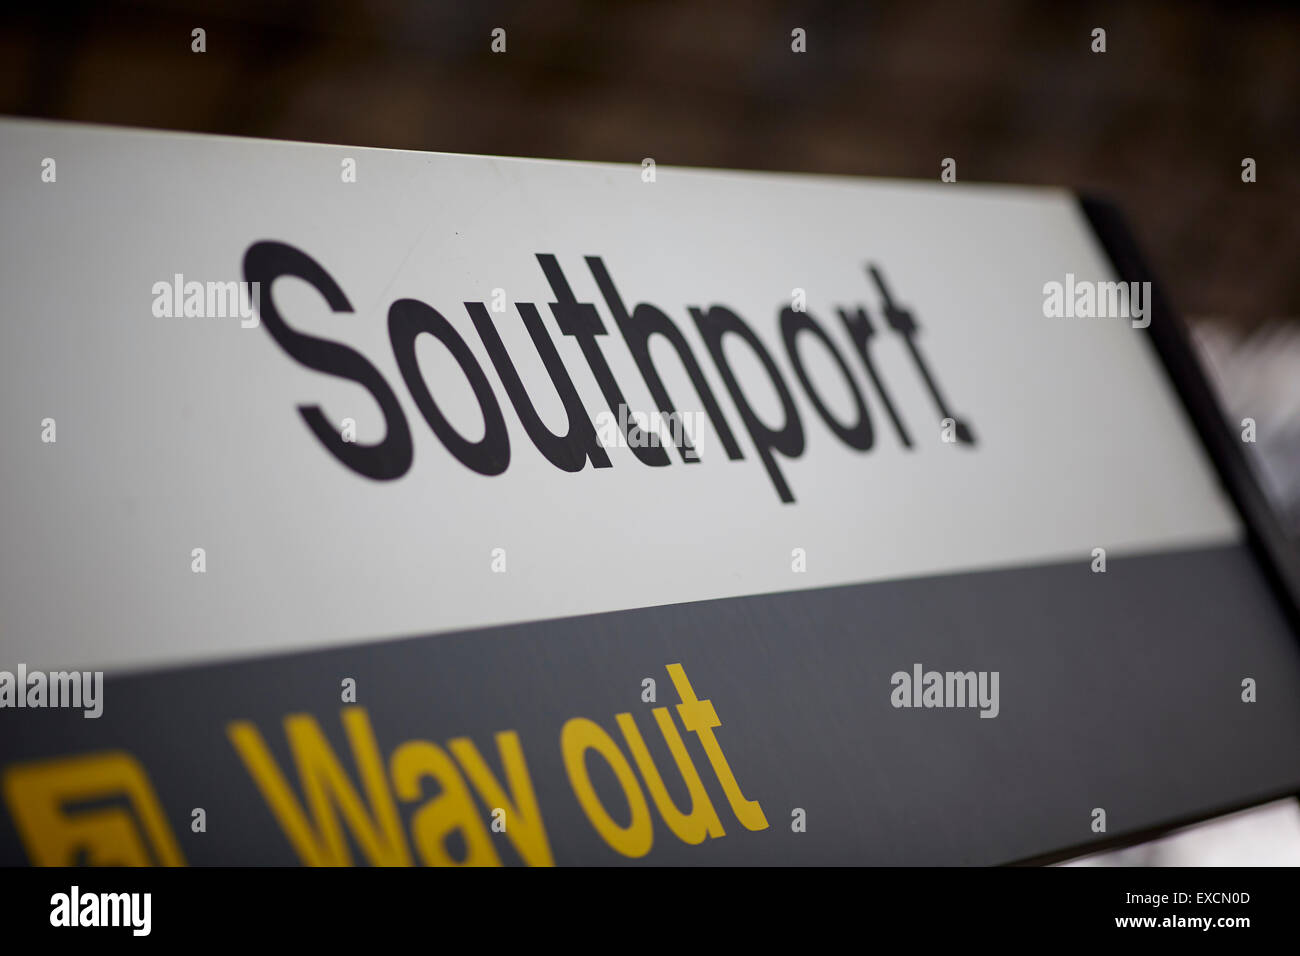 Pictures around Southport   Pictured  Southport railway station sign   Southport is a large seaside town in the Metropolitan Bor Stock Photo